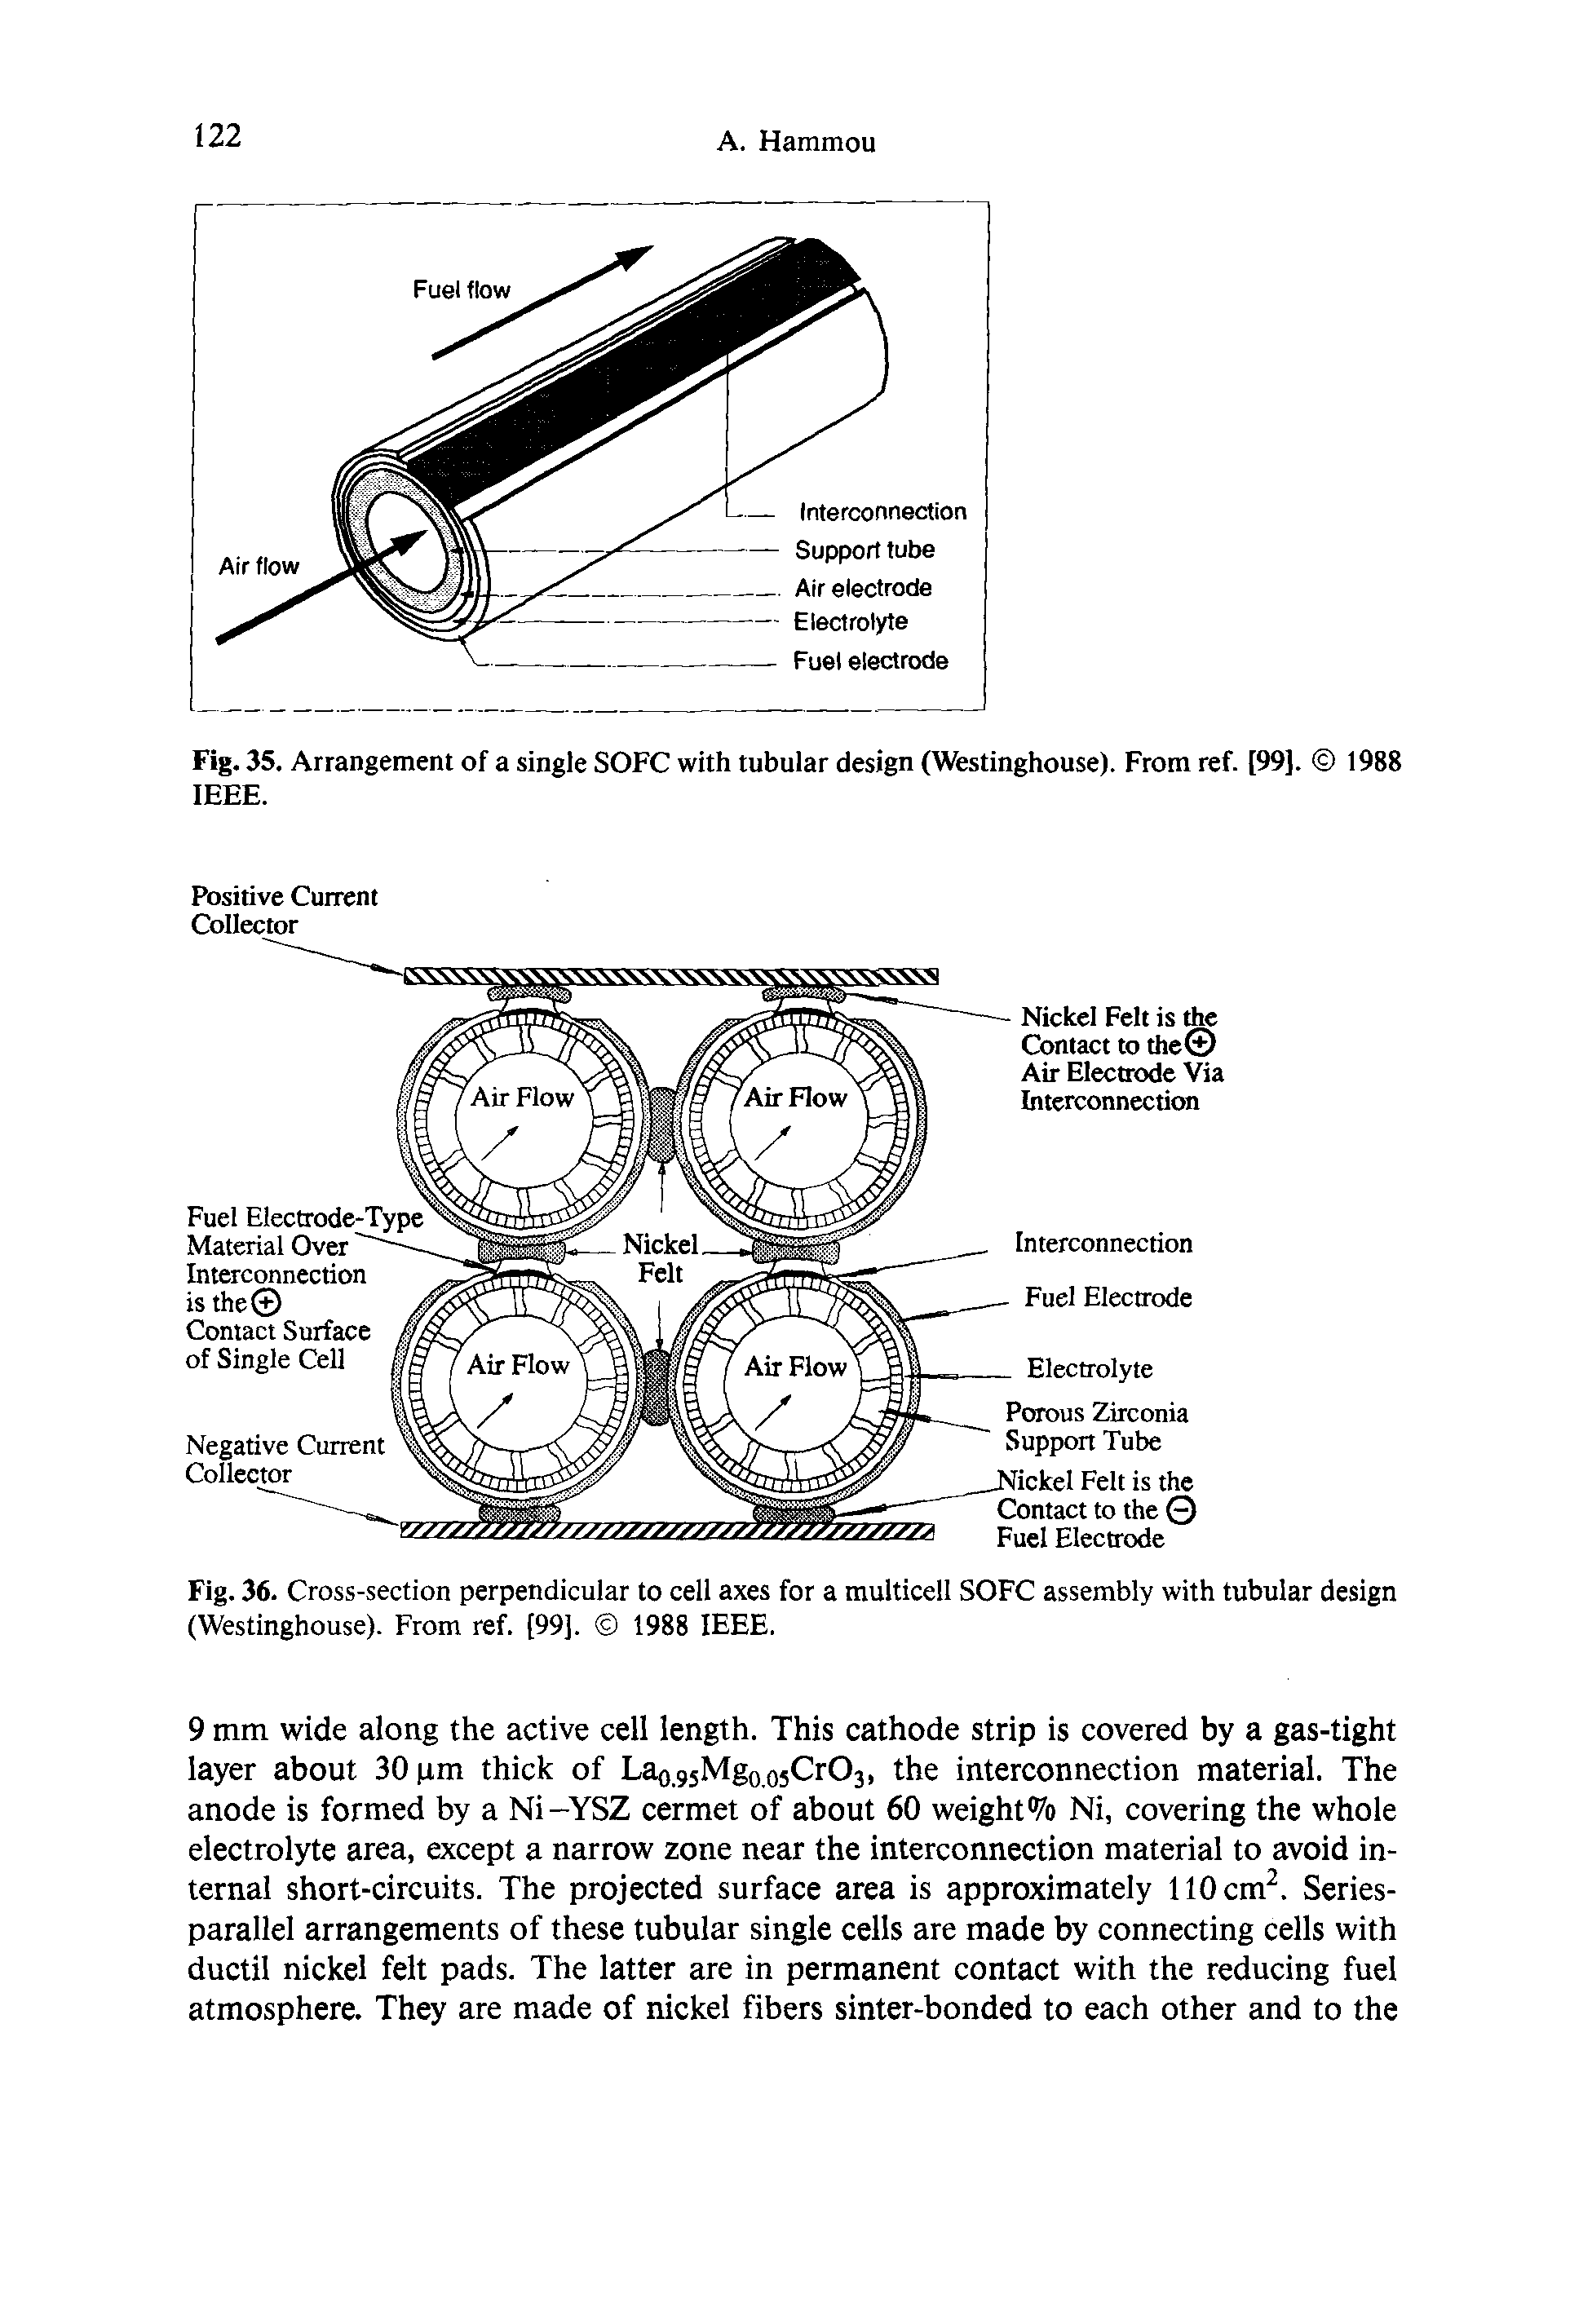 Fig. 35. Arrangement of a single SOFC with tubular design (Westinghouse). From ref. [99]. 1988 IEEE.